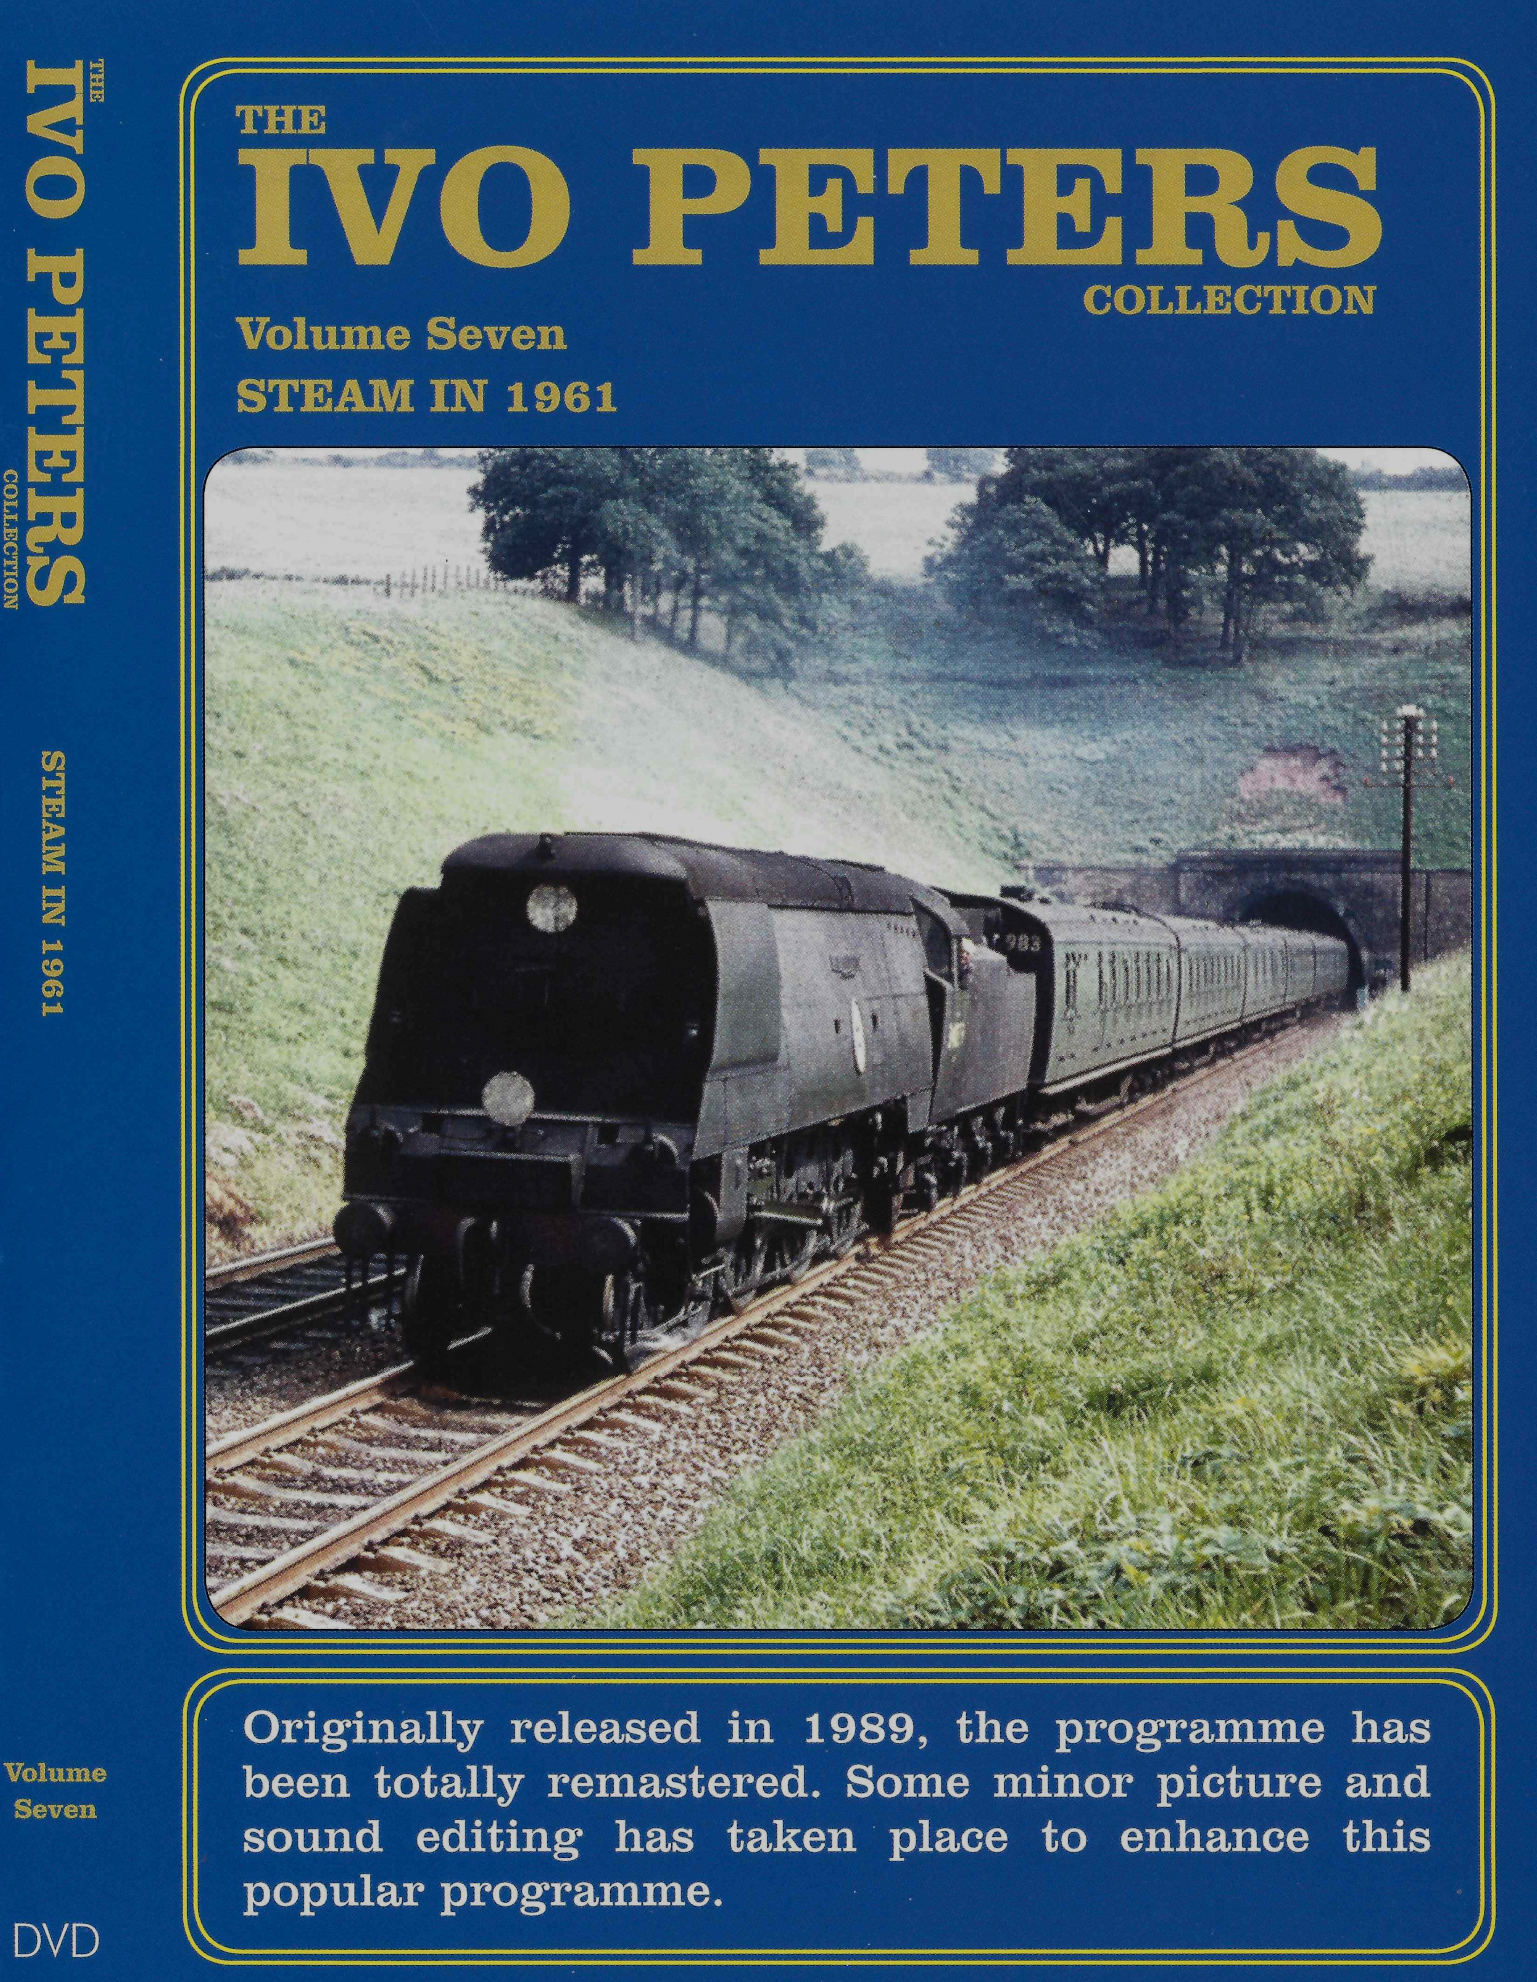 The Ivo Peters Collection Vol. 7: Steam in 1961